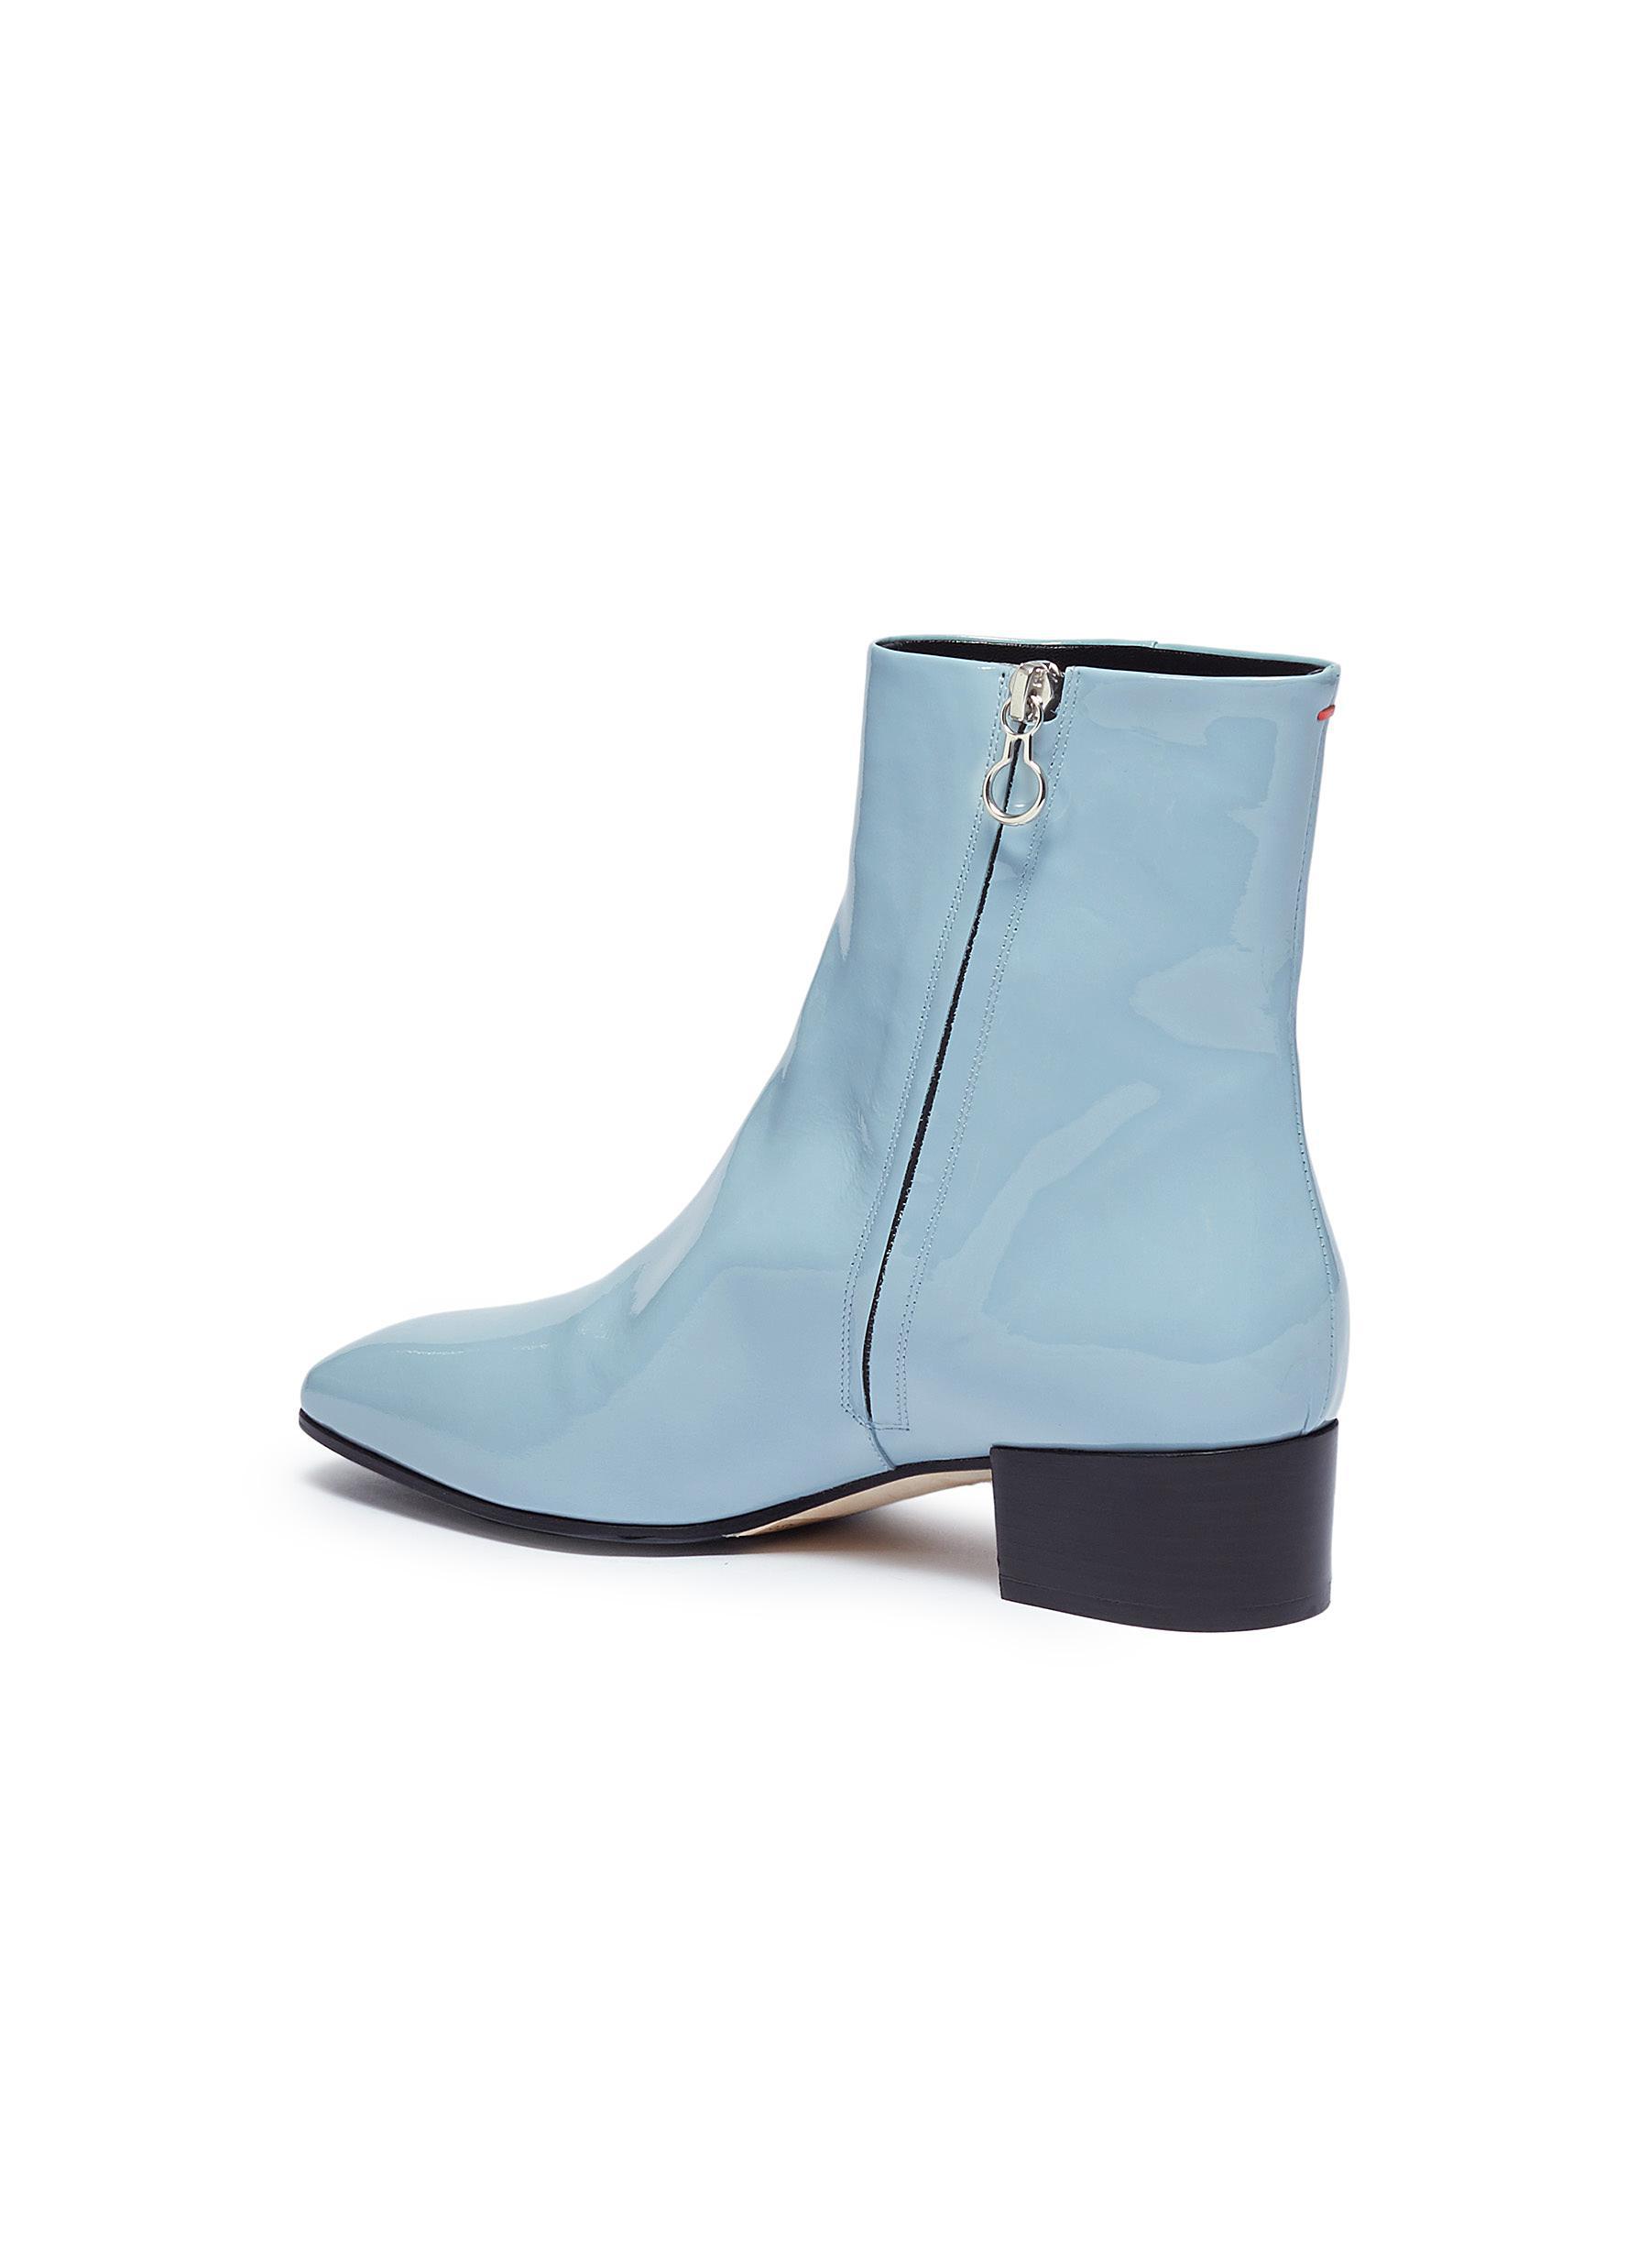 Aeyde 'naomi' Patent Leather Ankle Boots in Blue for Men - Lyst